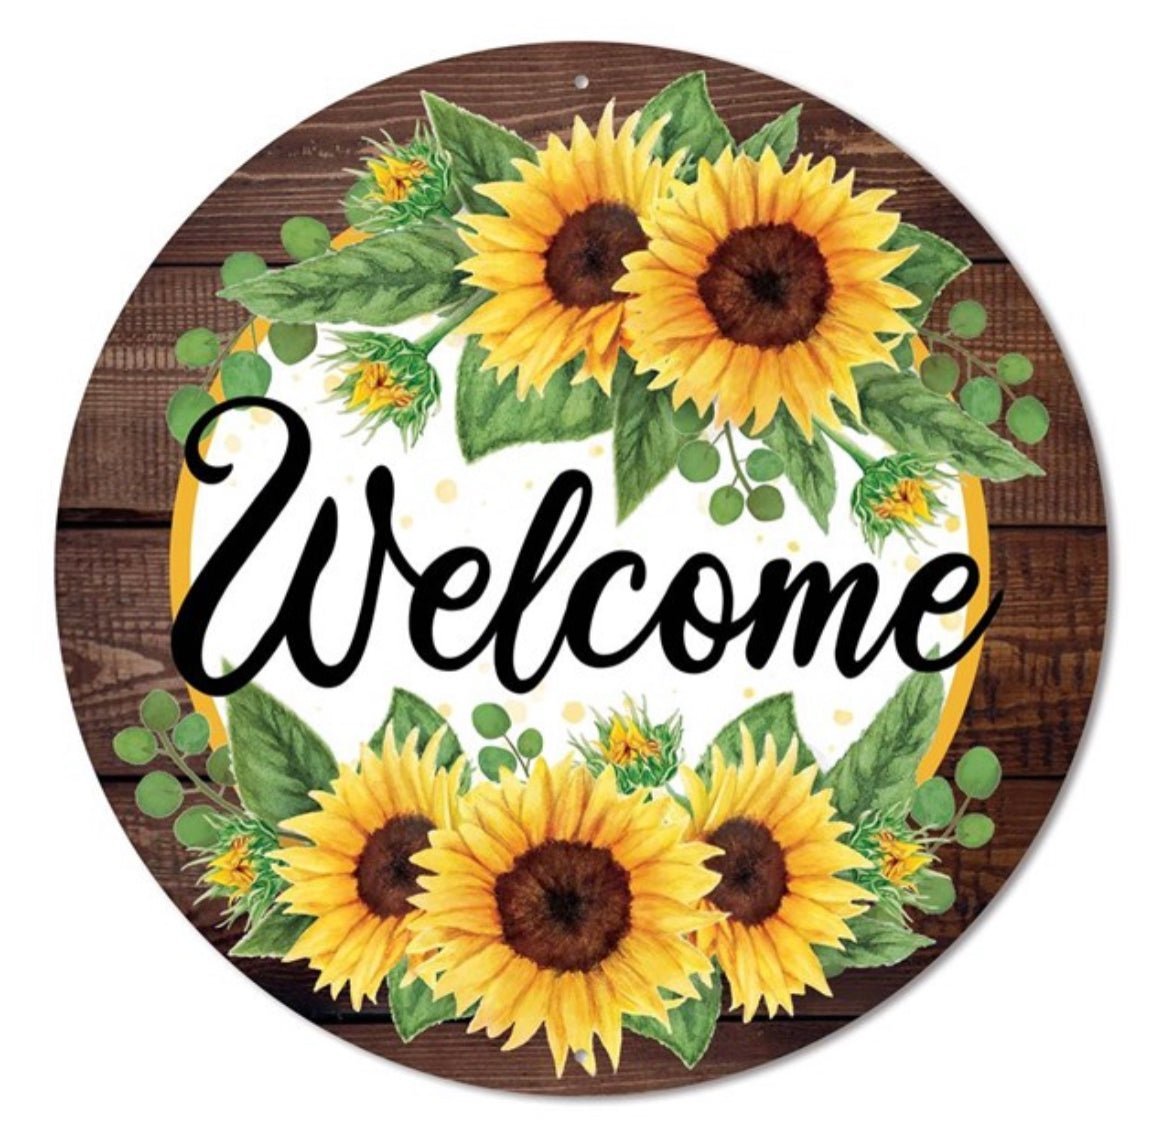 Sunflower and wood look metal welcome, round sign - Greenery MarketSeasonal & Holiday DecorationsMD0878